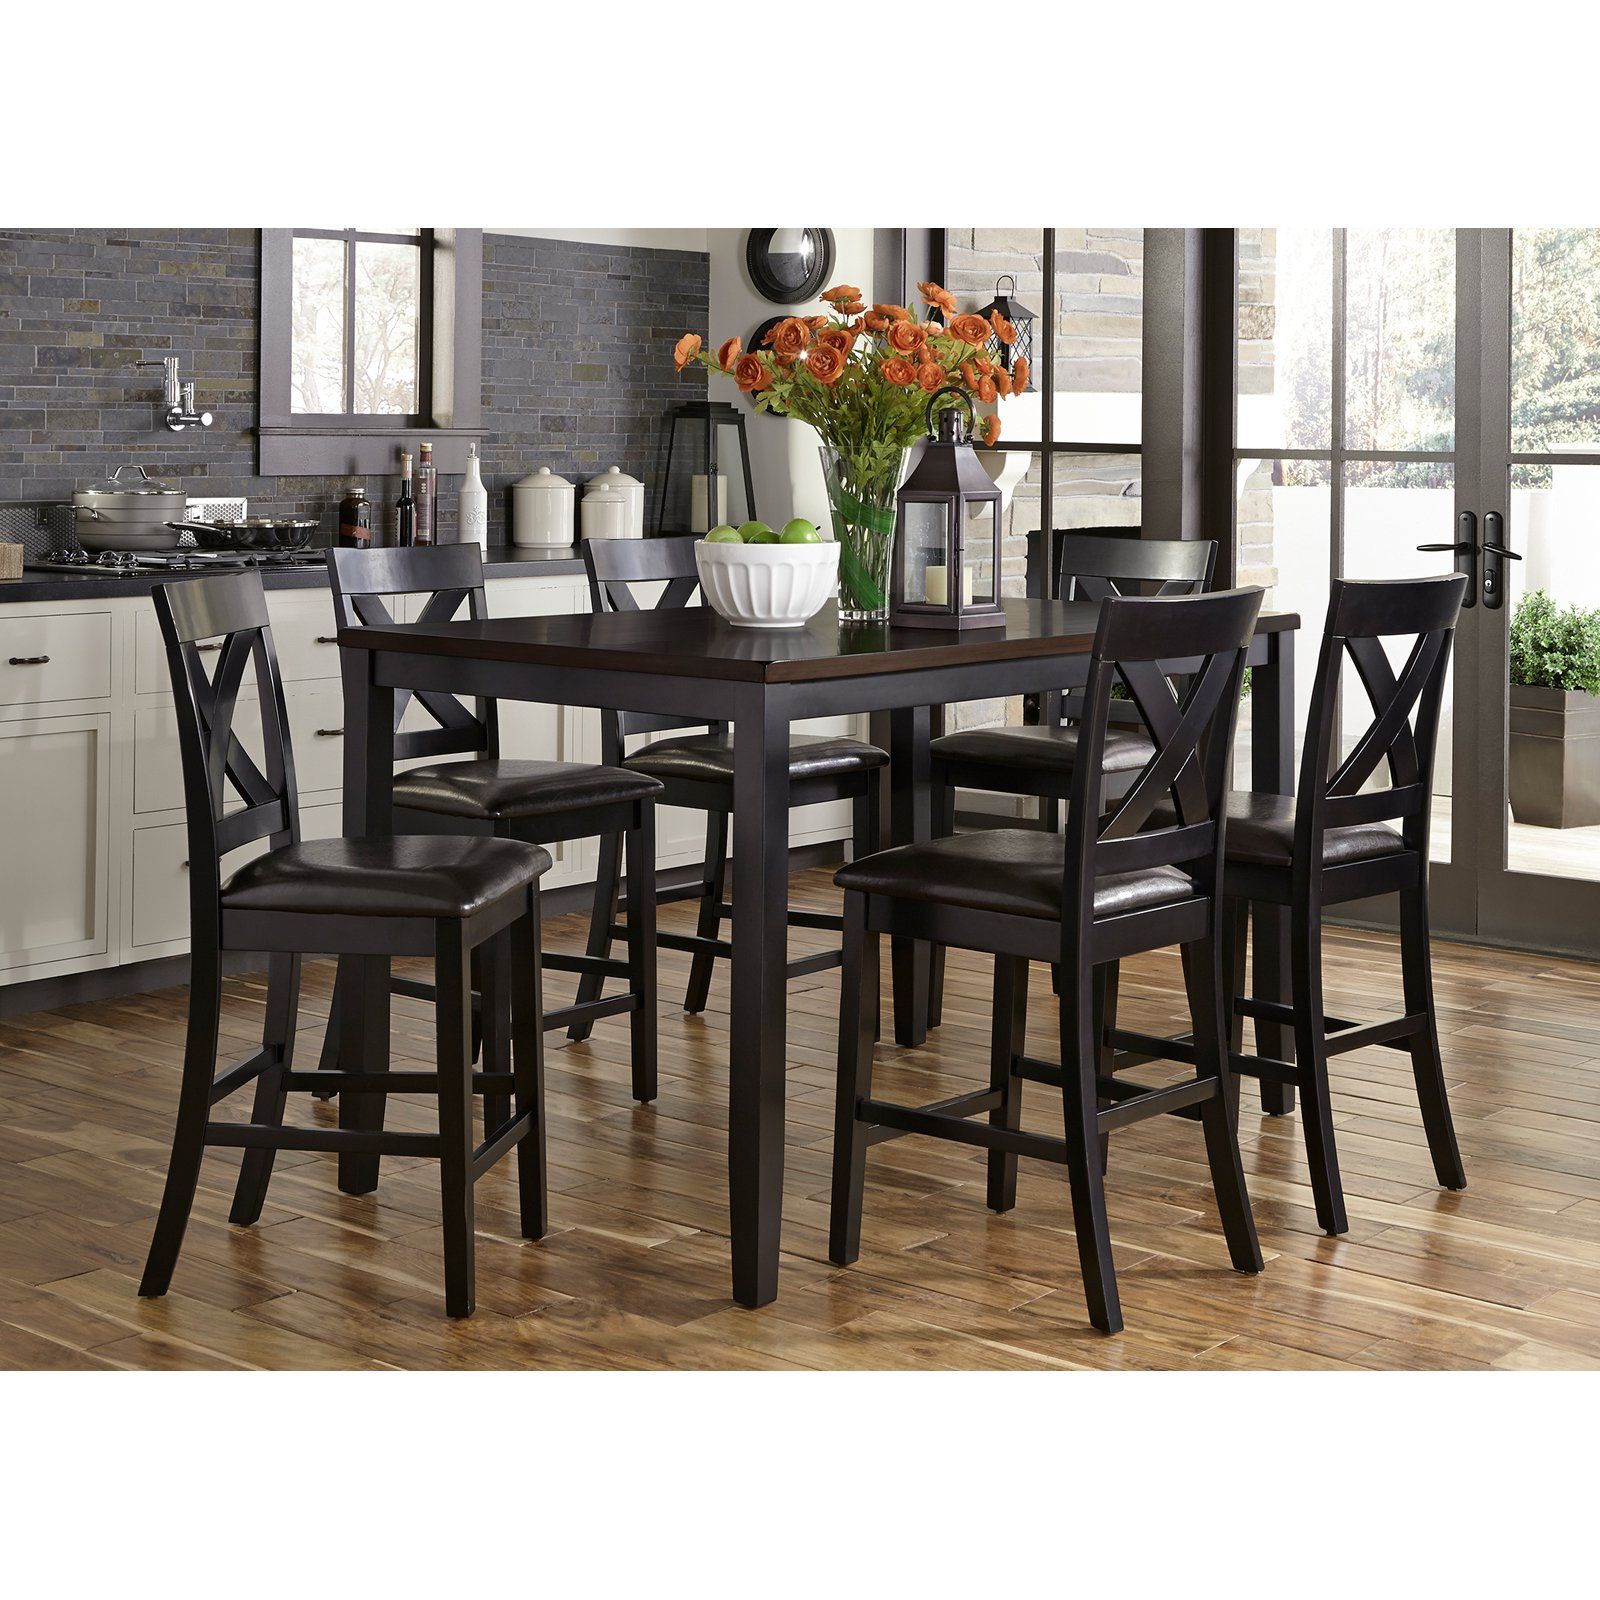 Preferred Liberty Furniture Industries Thornton Ii 7 Piece Counter With Regard To Abby Bar Height Dining Tables (View 10 of 20)